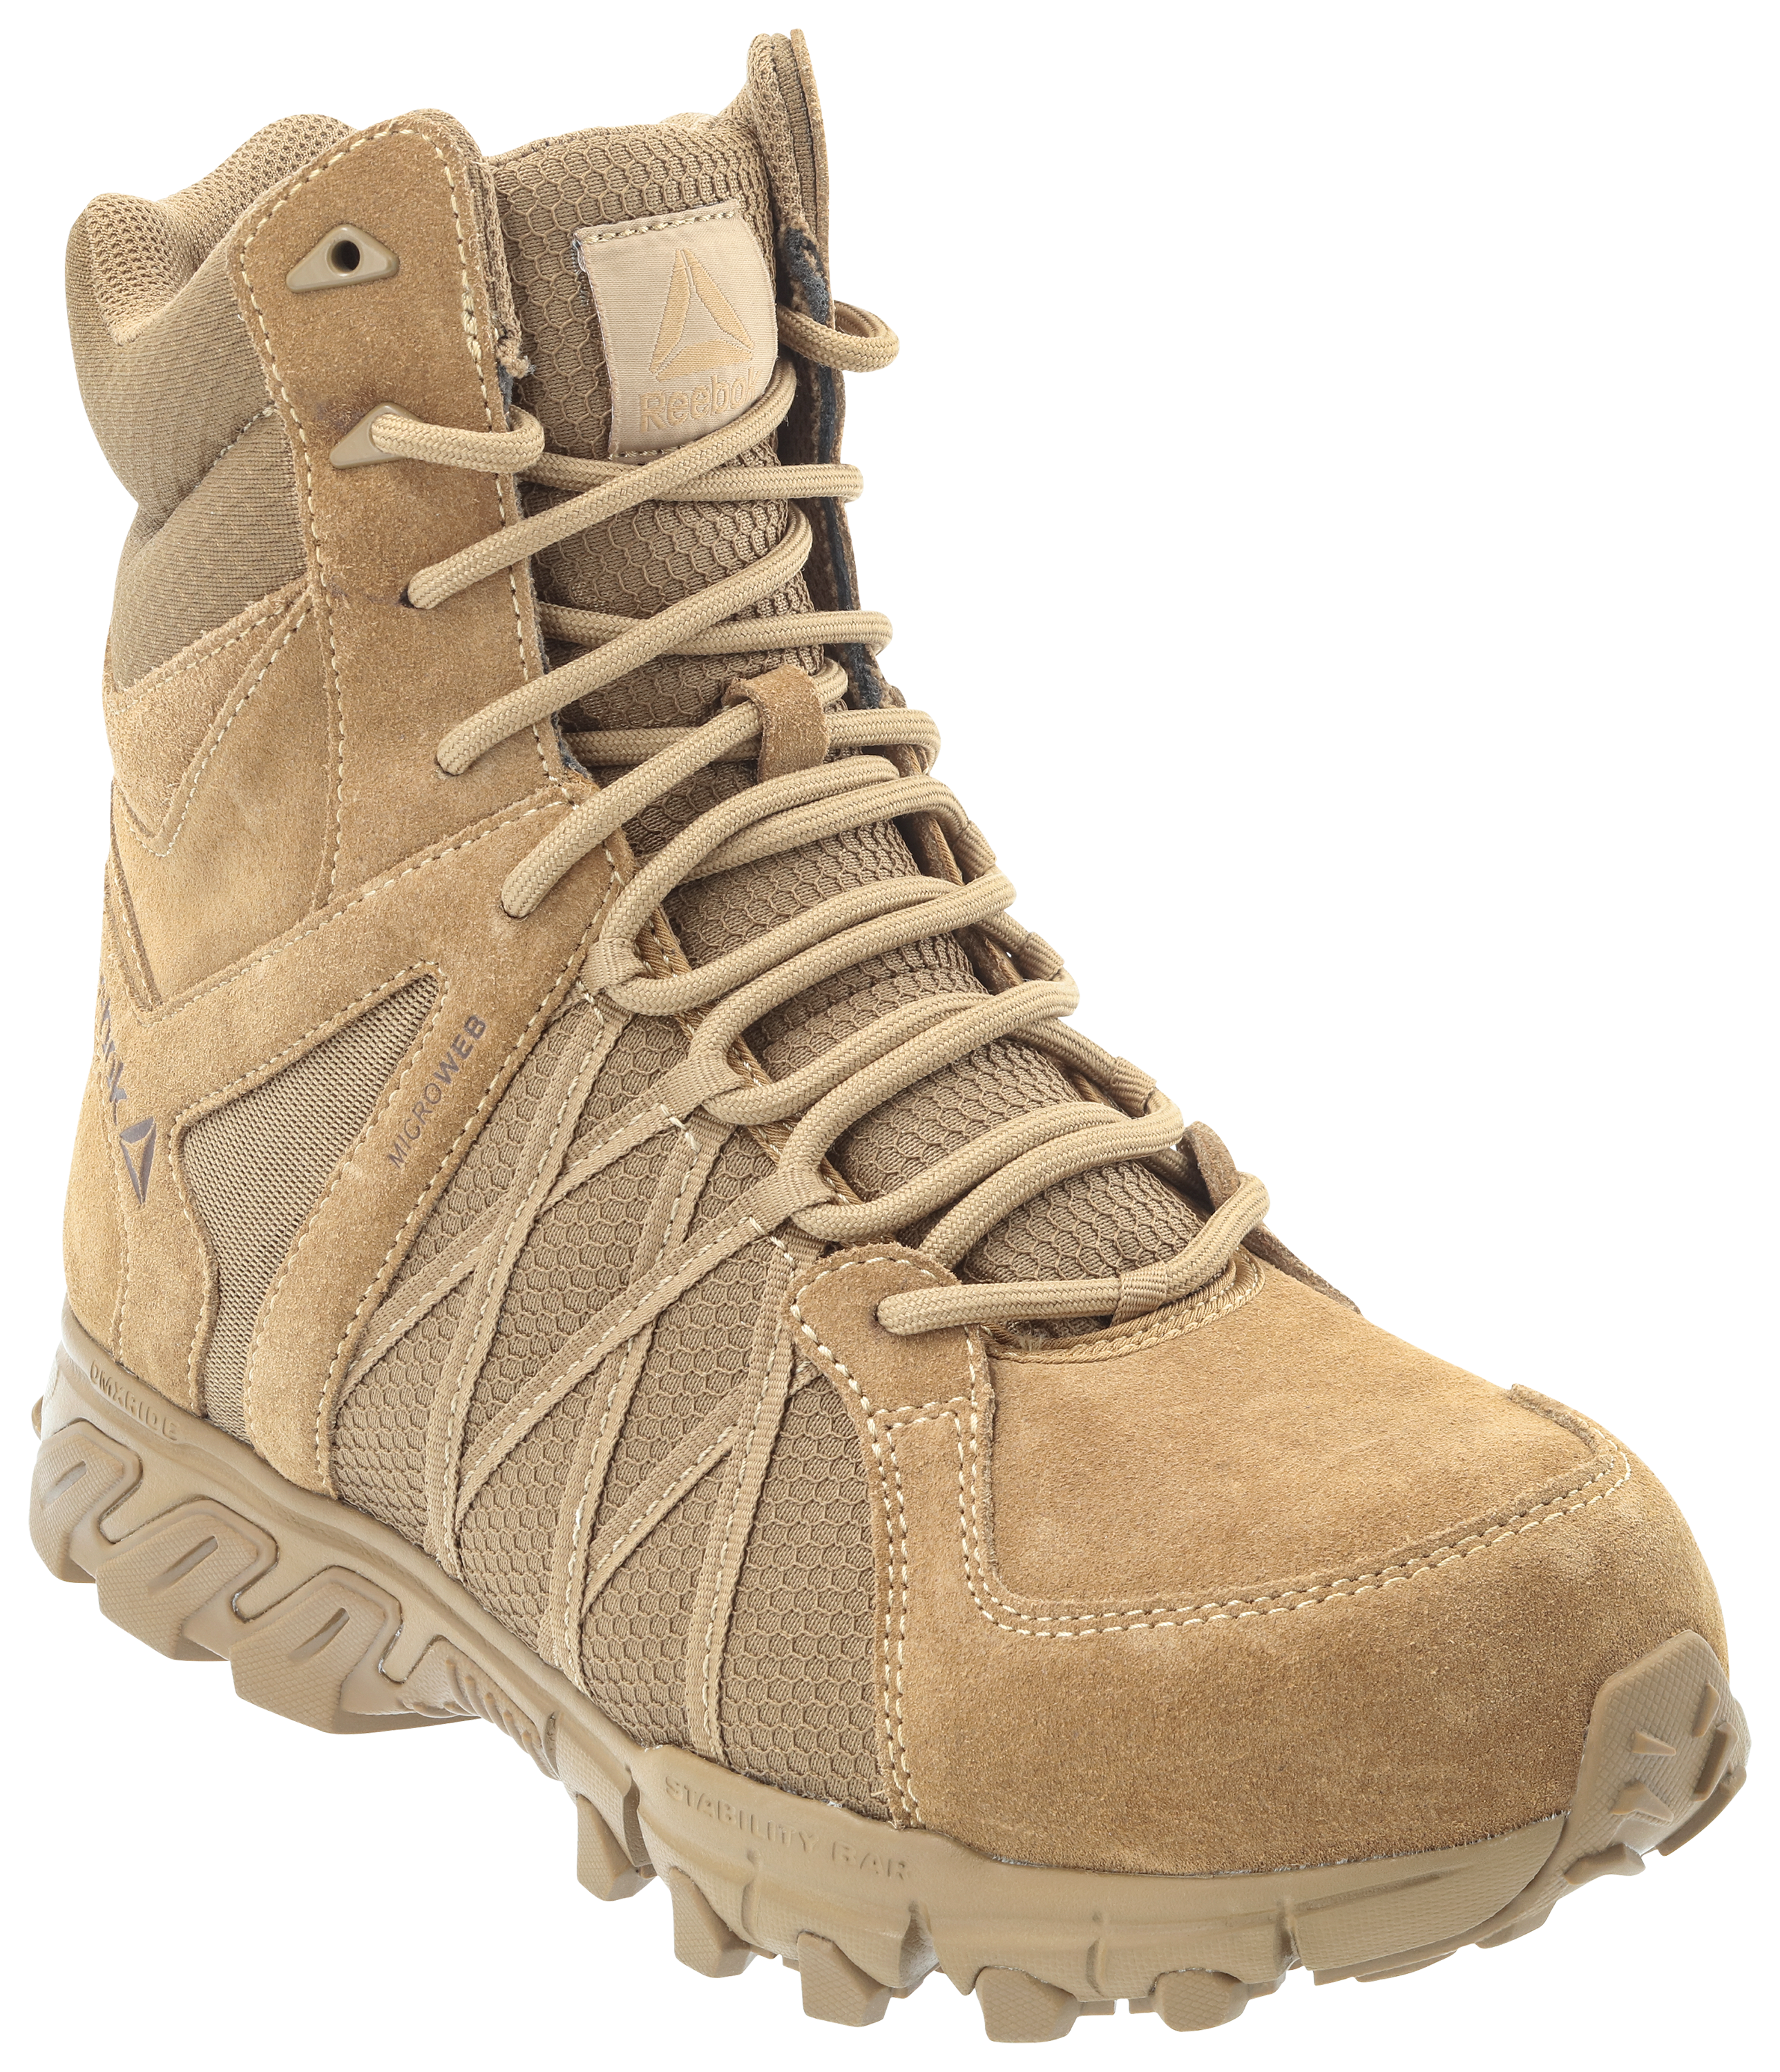 Reebok Trailgrip Tactical Composite Toe Side Zip Work Boots for Men - Coyote Brown - 11M